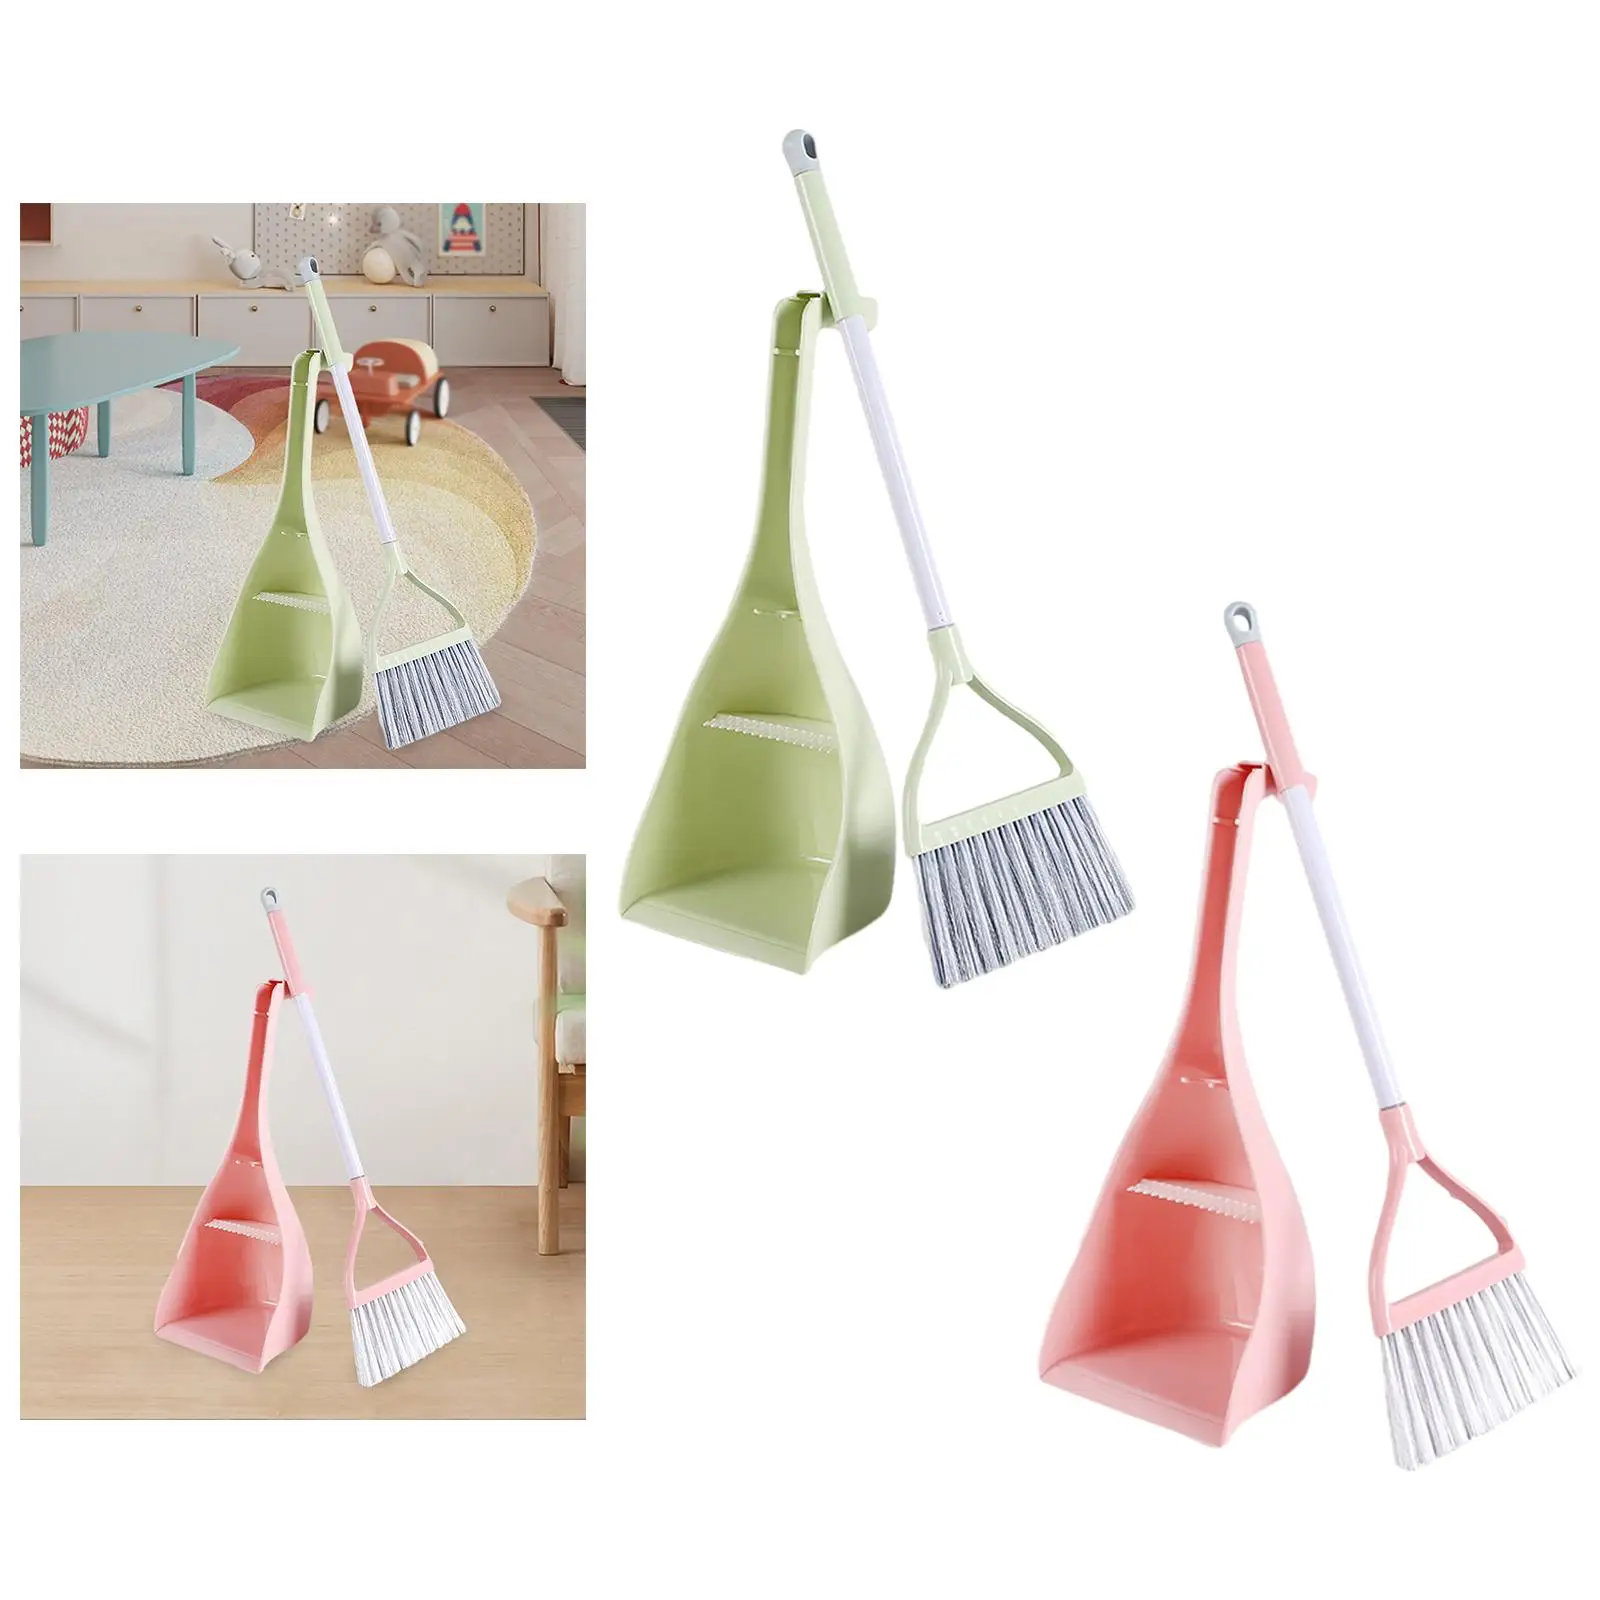 Kids Broom Set Role Playing Holiday Gifts Mini Broom with Dustpan for Preschool Kindergarten Ages 3-6 Years Old Boys Girls